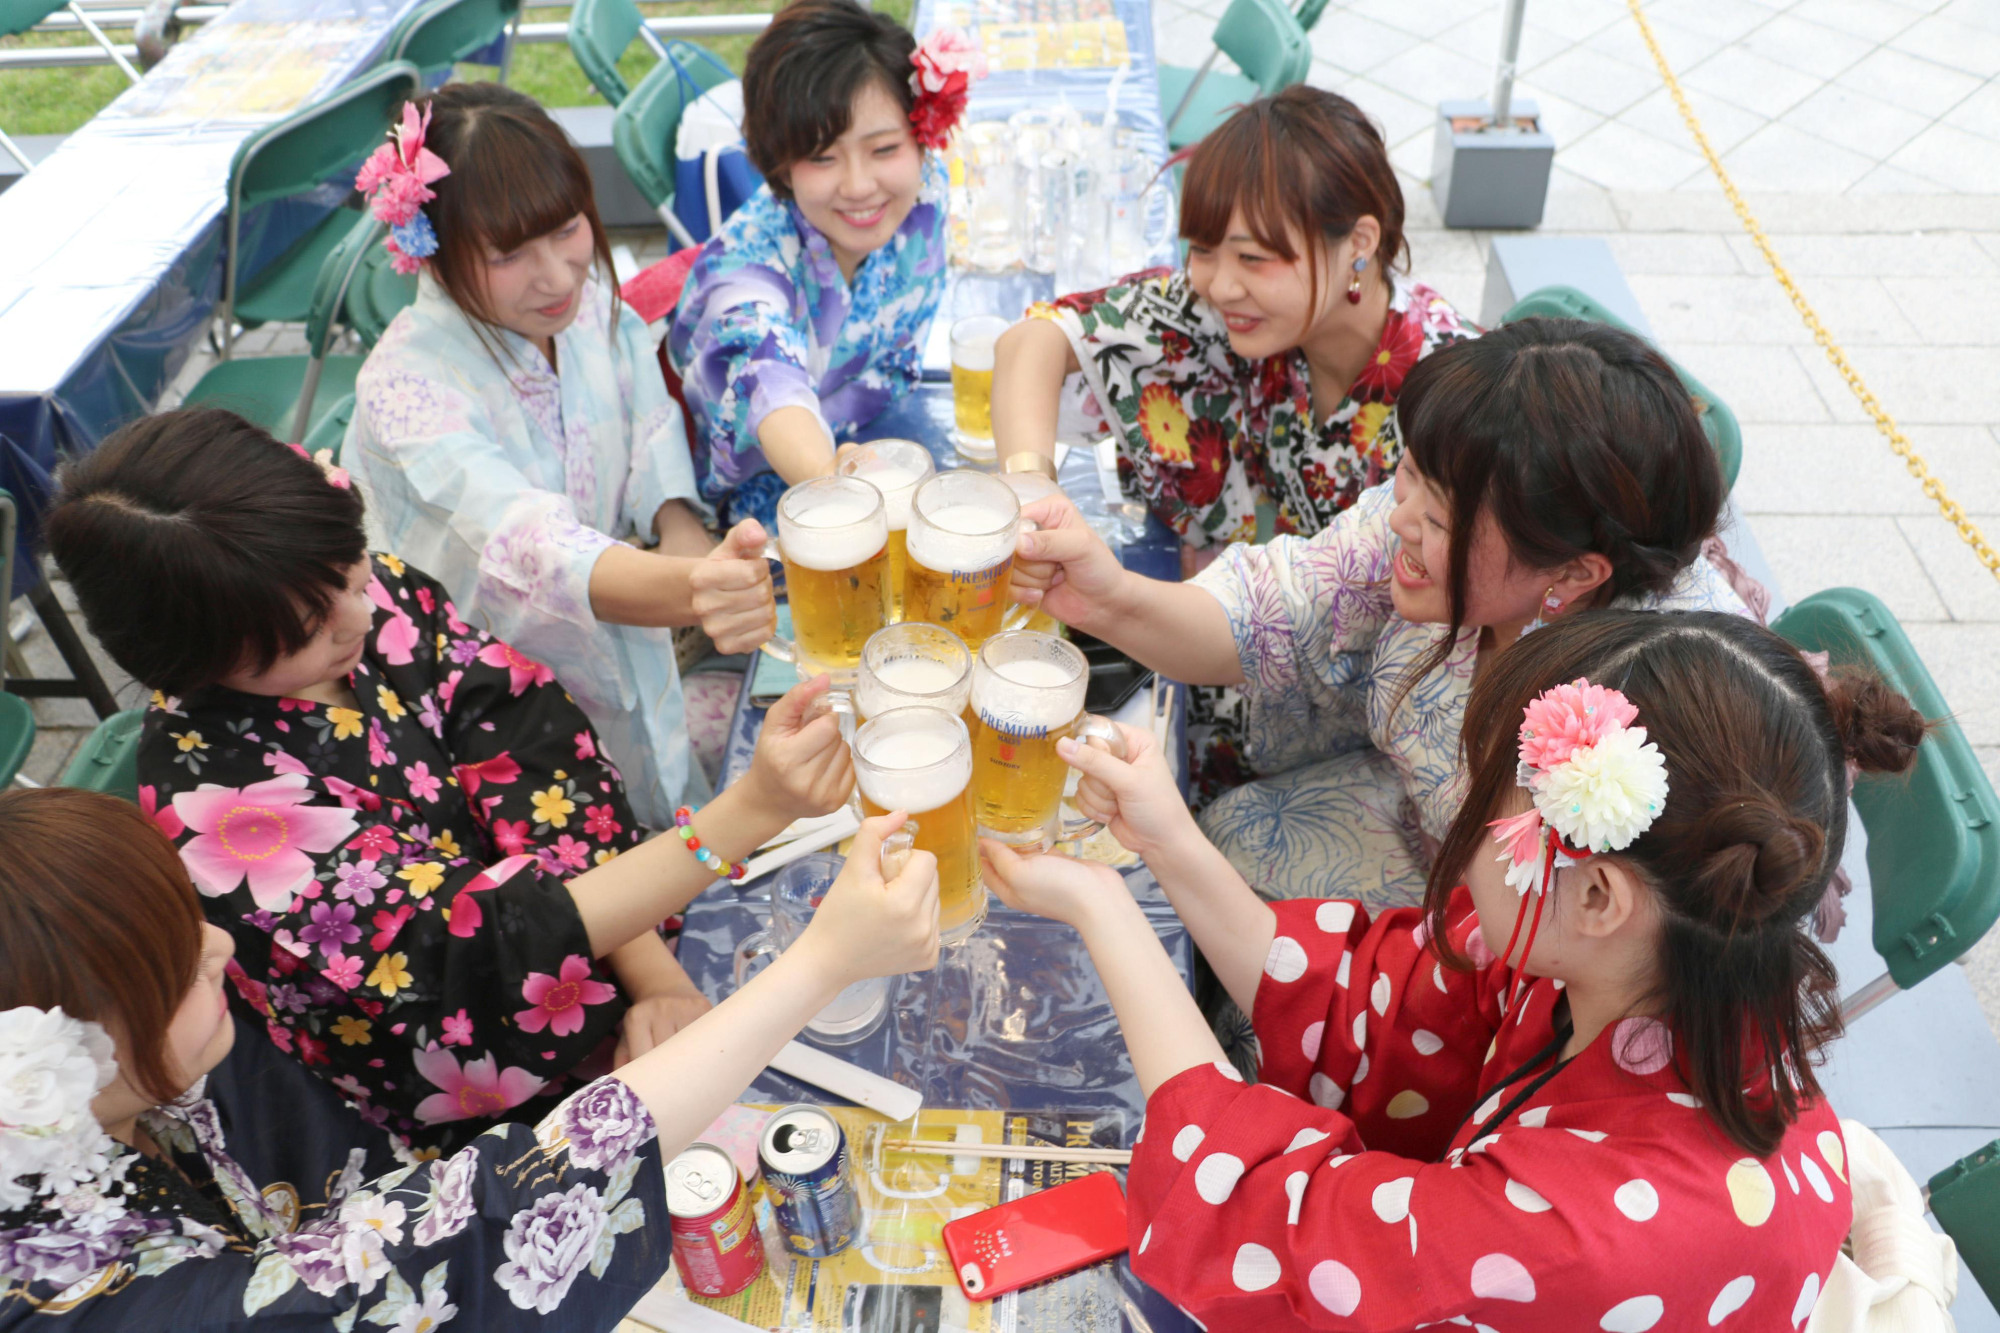 Starting Sunday beer makers will be allowed to add new ingredients when brewing beer, including fruit, spices and oysters. | KYODO